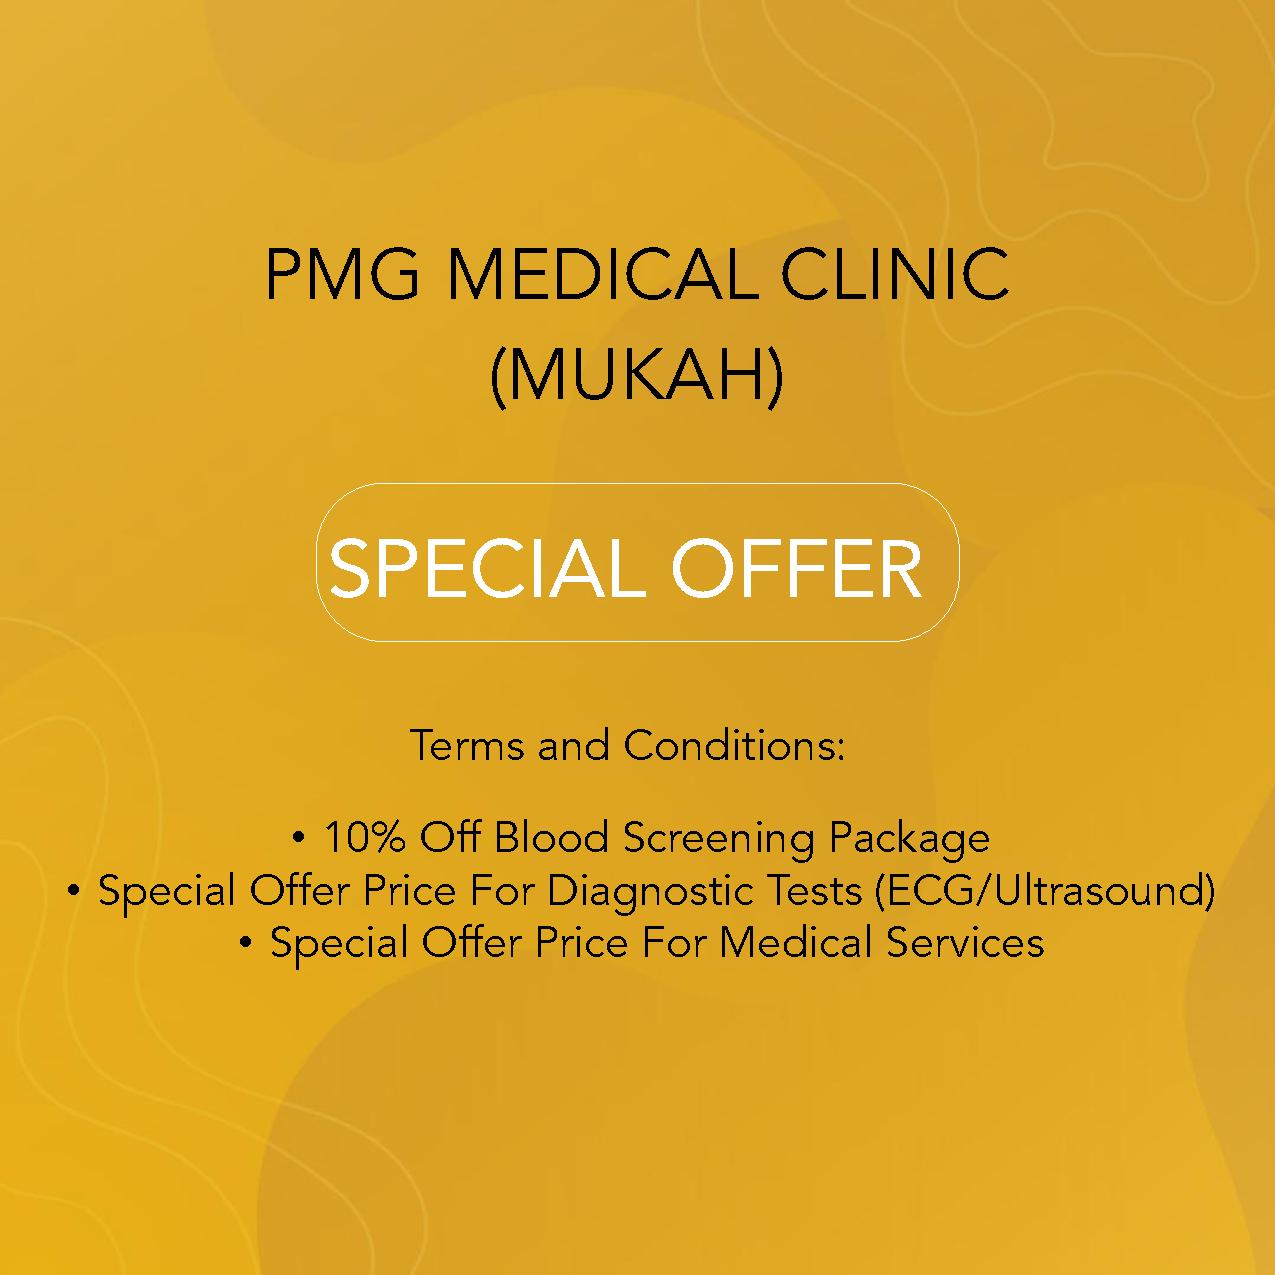 PMG MEDICAL CLINIC (MUKAH)